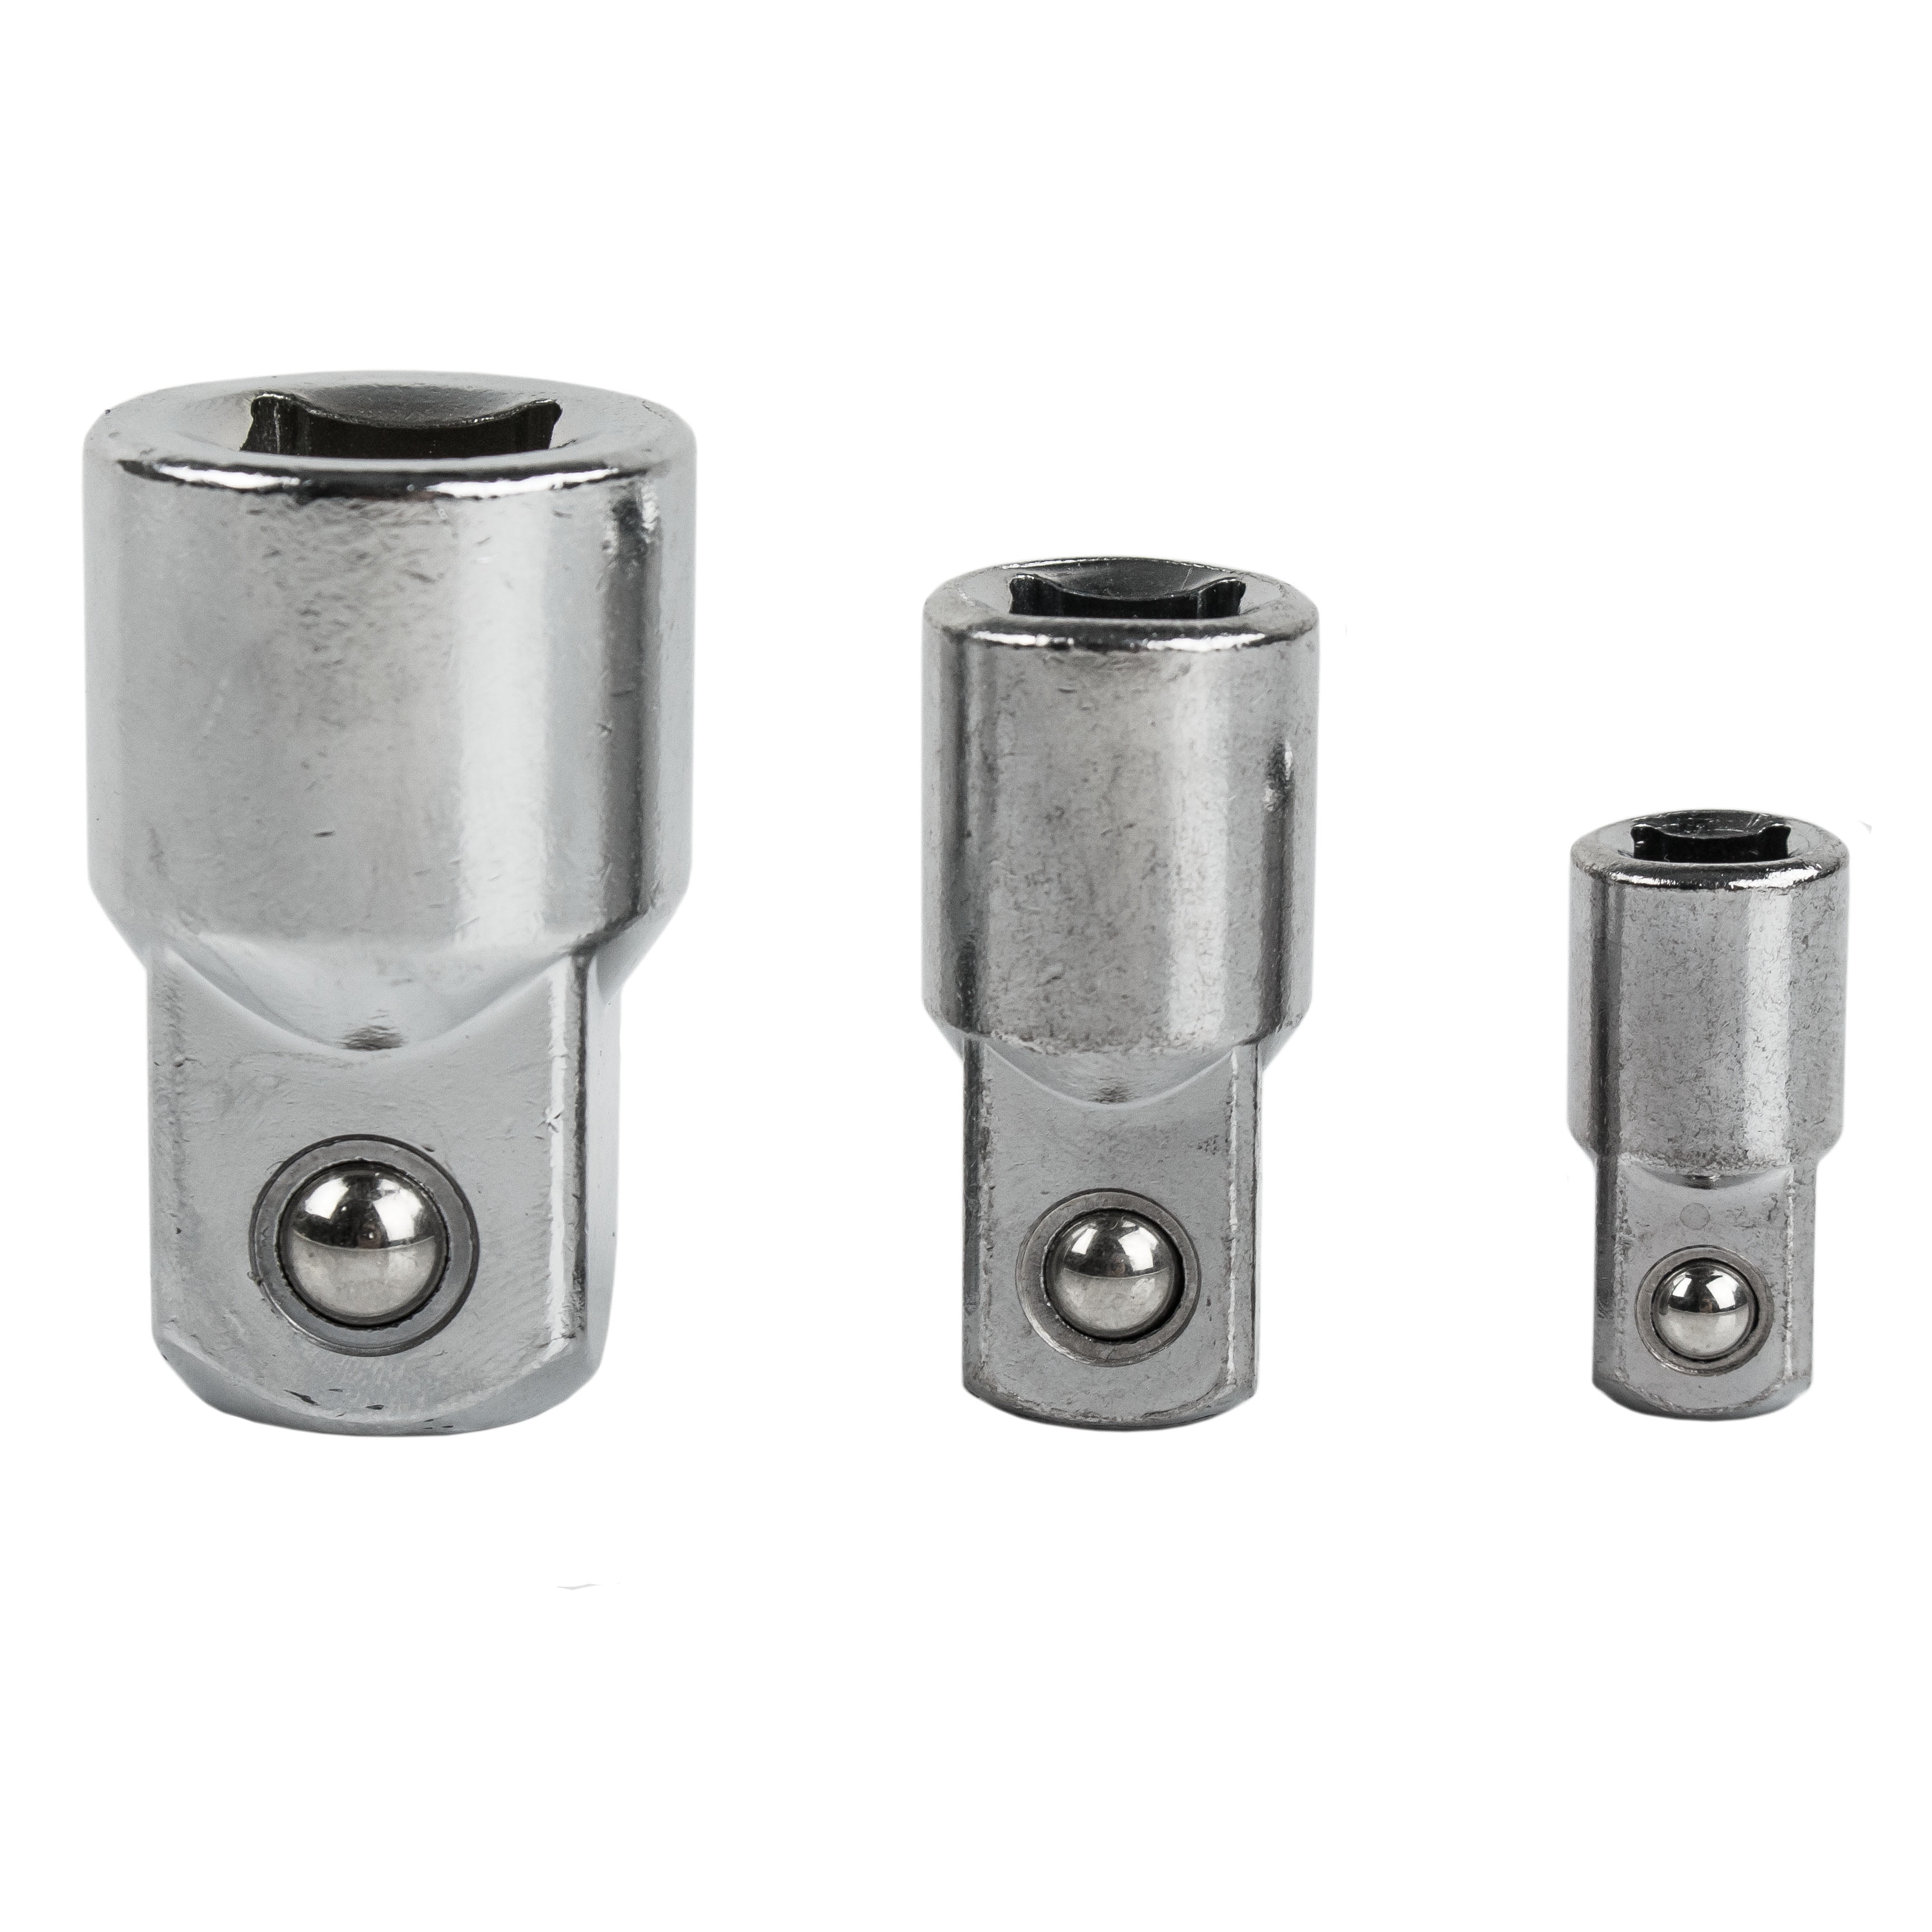 Details about   3/8 to 1/2'' Socket Reducer Impact Heavy Duty Ratchet Converter Adapter US Stock 